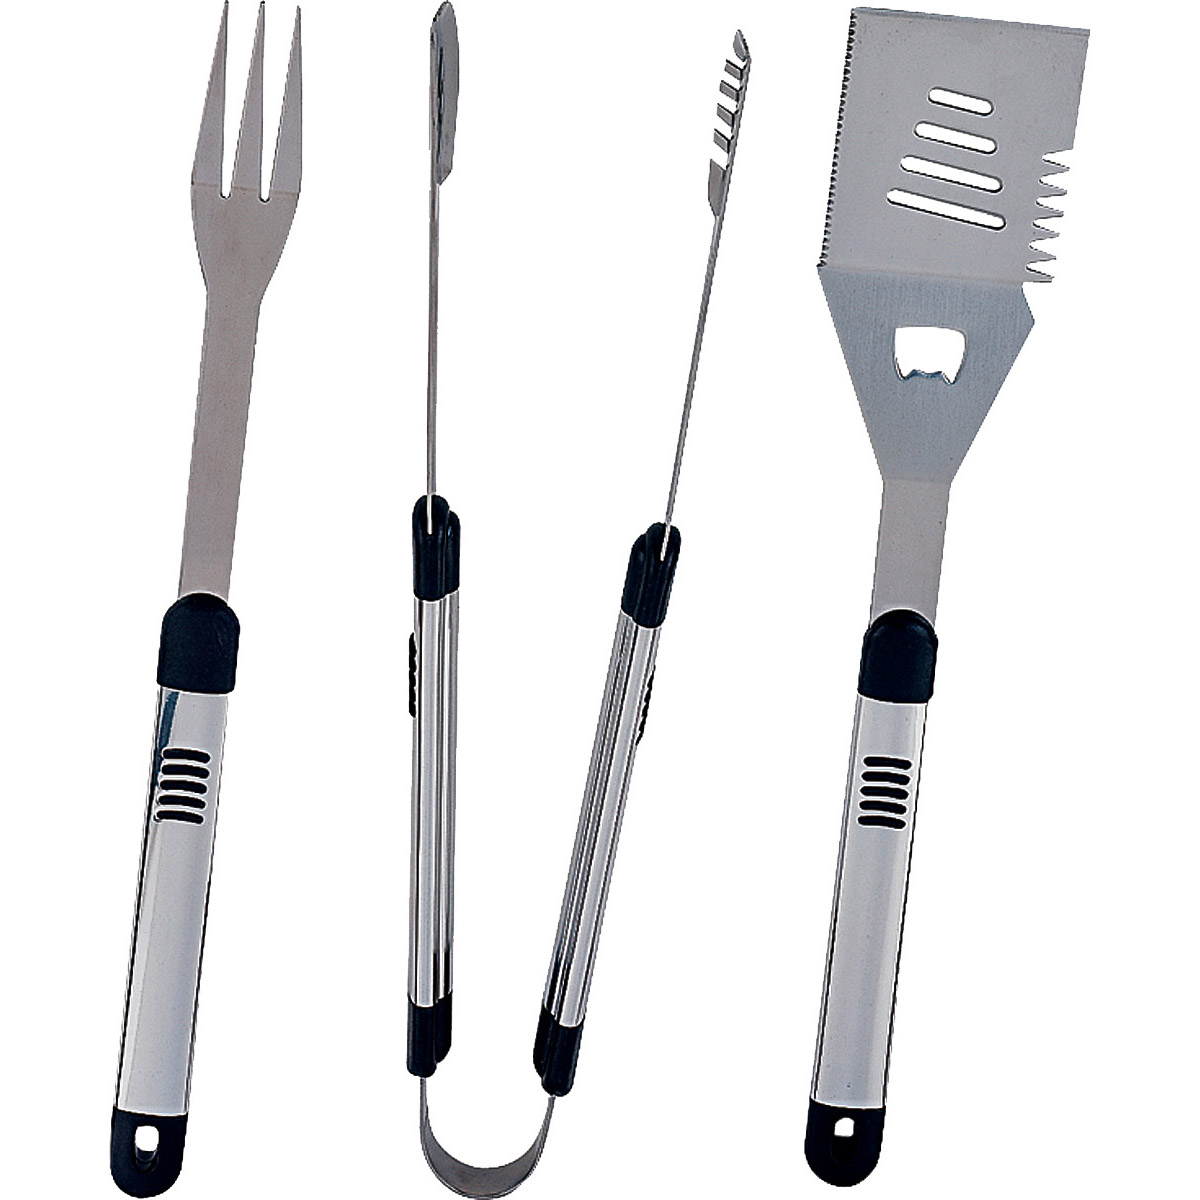 SHE94031L-B Barbecue Tool Set with Handle and Hanger, 1.9 mm Gauge, Stainless Steel Blade, Stainless Steel